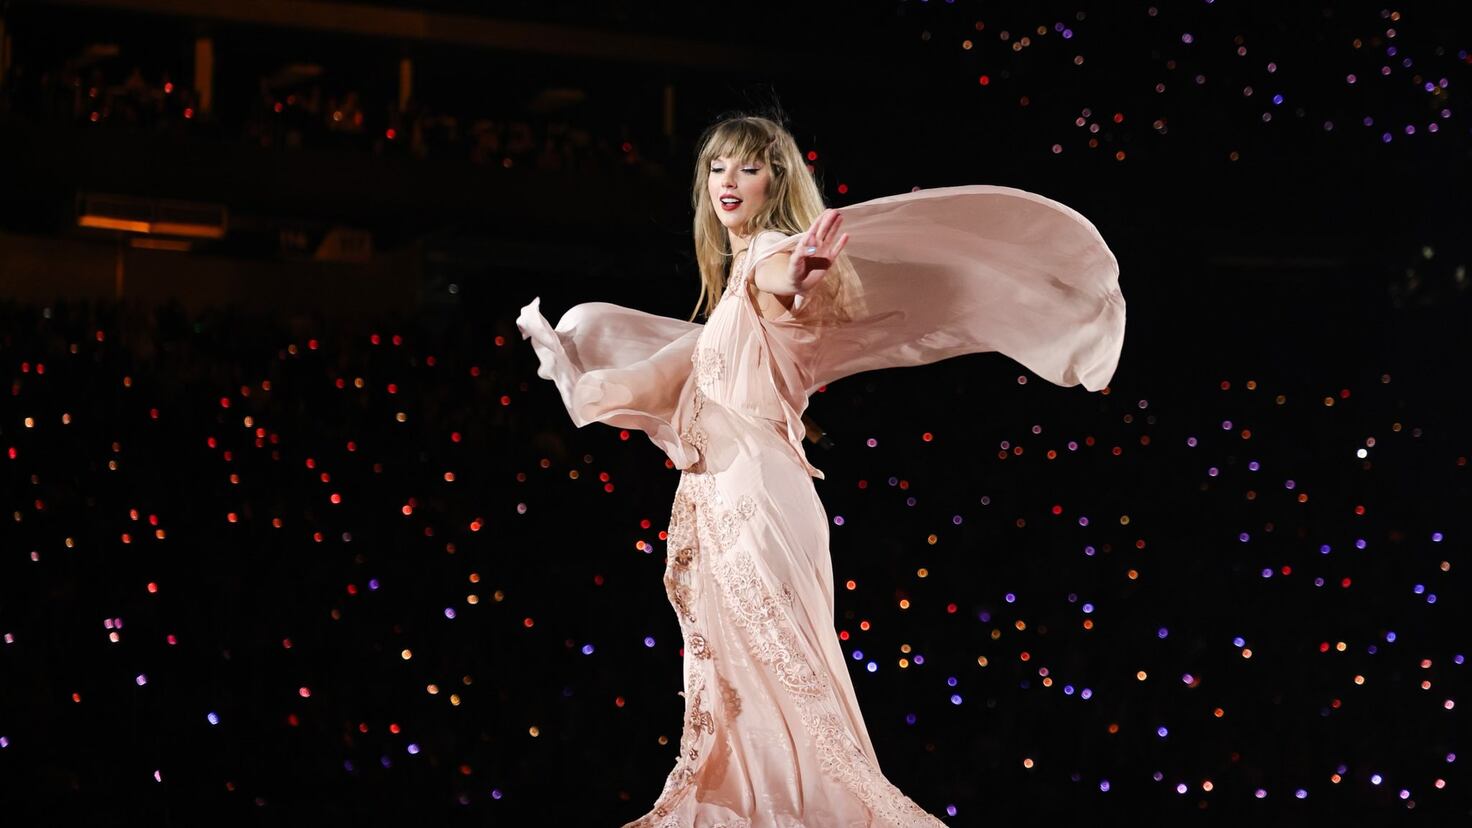 What surprise songs did Taylor Swift perform on night one of her 